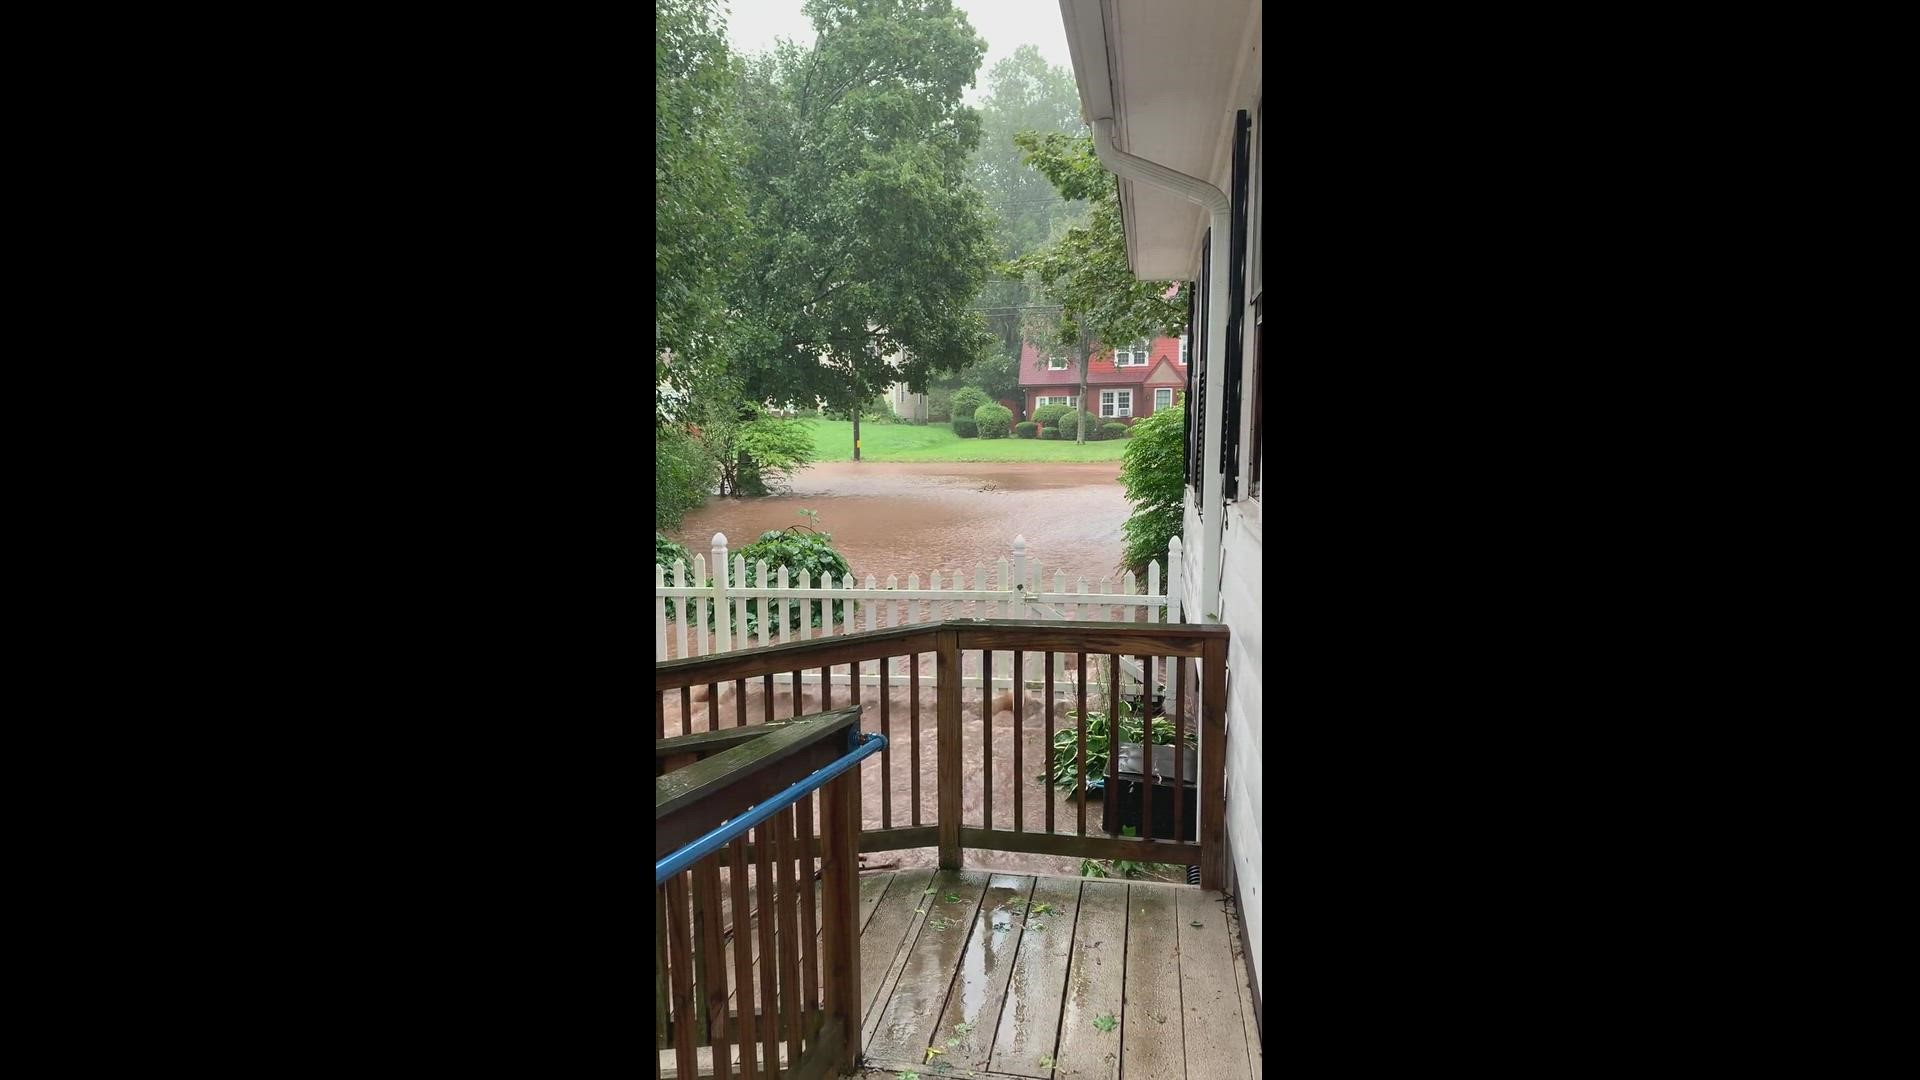 Flooded backyard in at home on E. Center Street in Manchester, Connecticut.
Credit: Kristin M